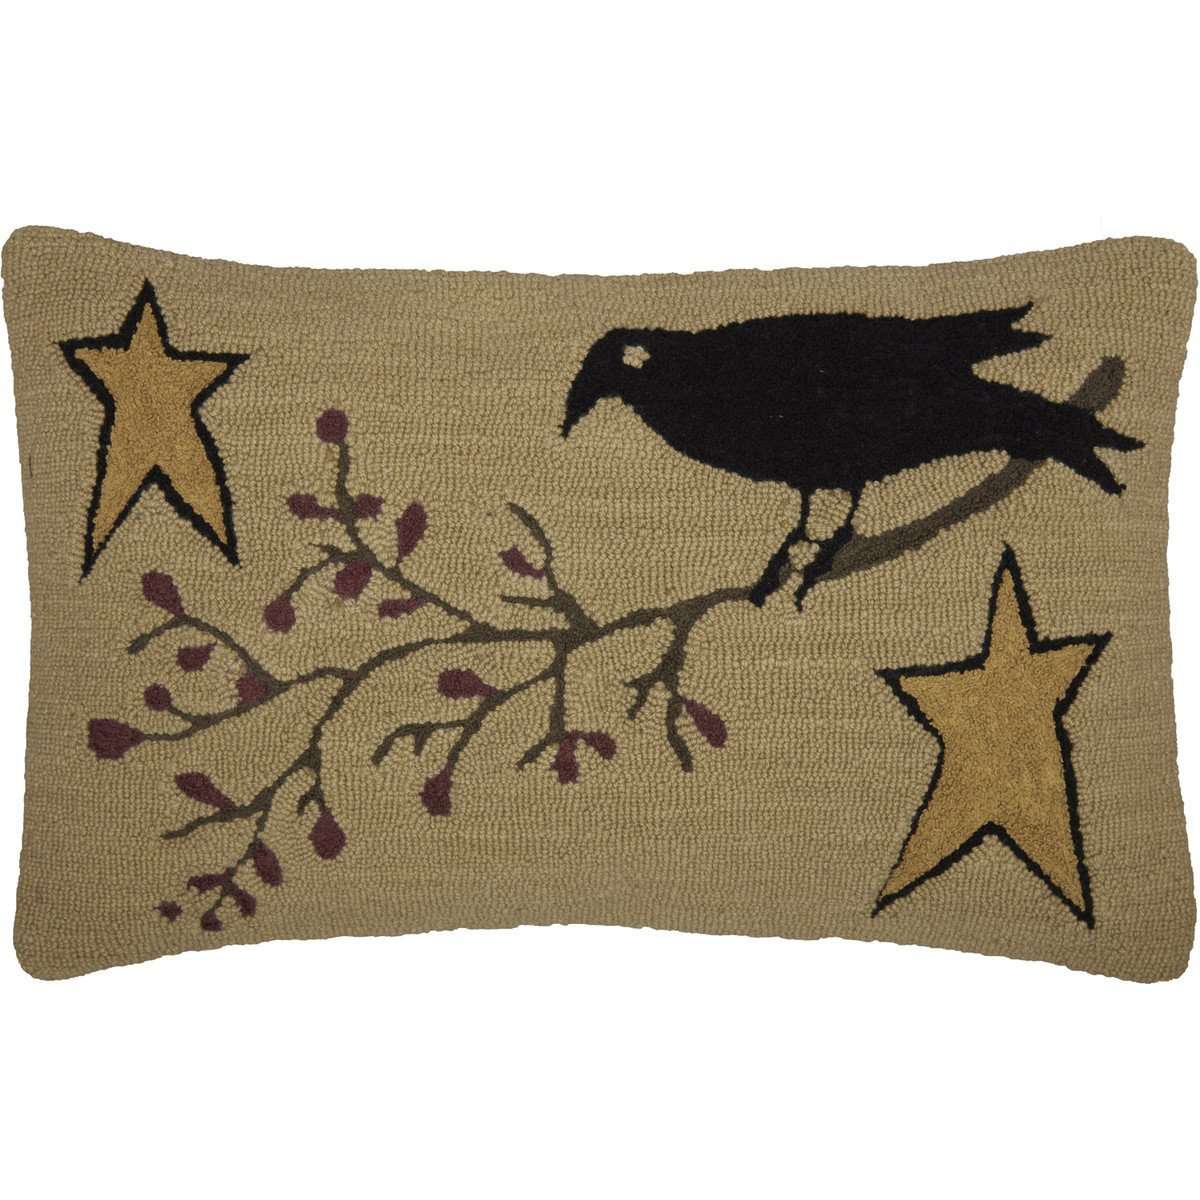 Kettle Grove Crow and Star Hooked Pillow 14"x22" - The Fox Decor